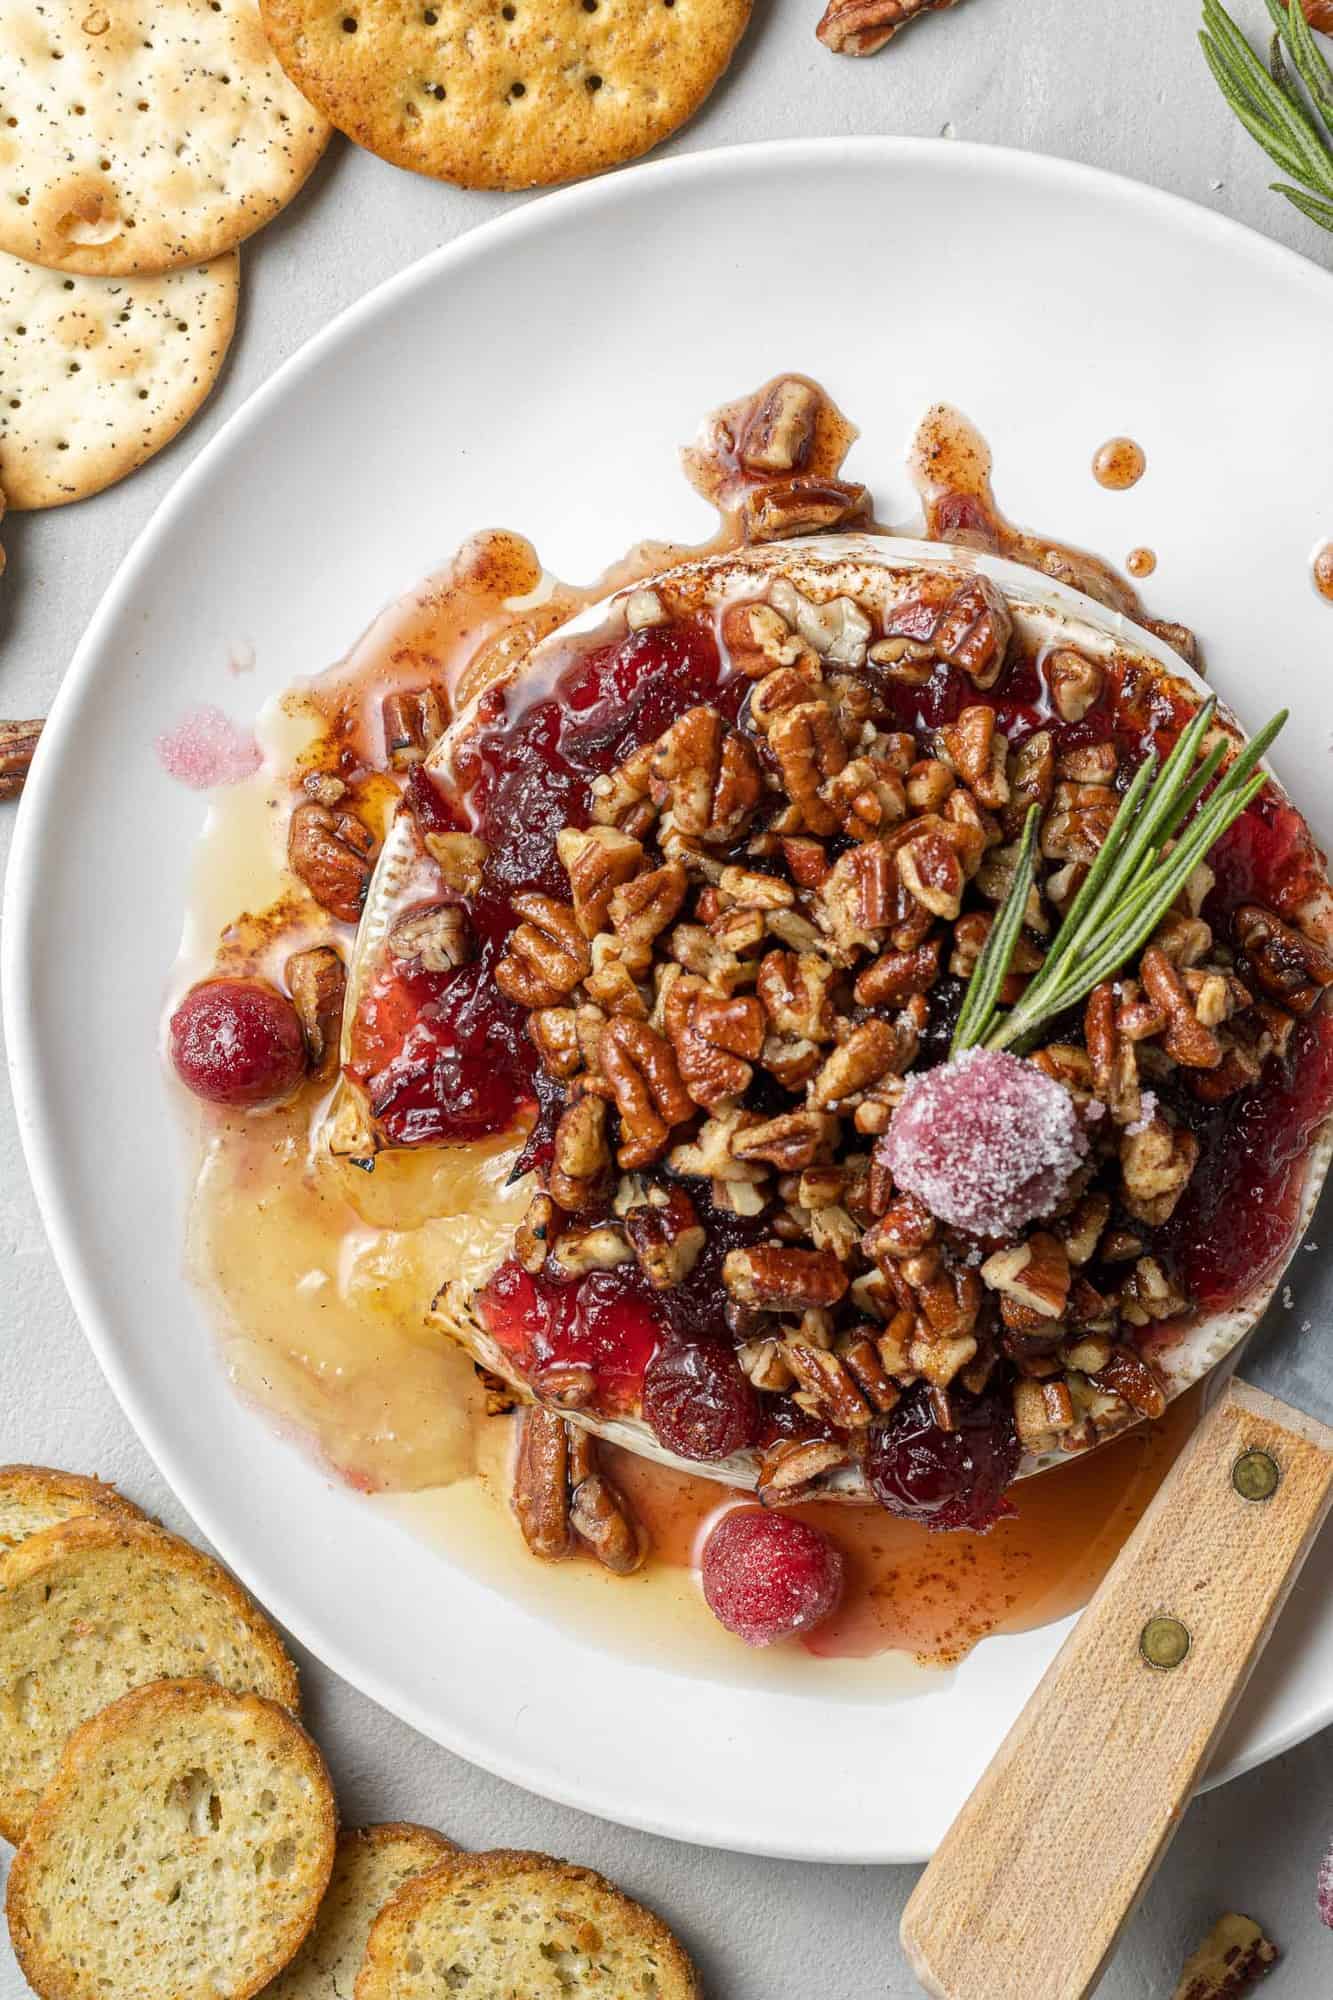 Overhead view of baked brie topped with cranberries and pecans.